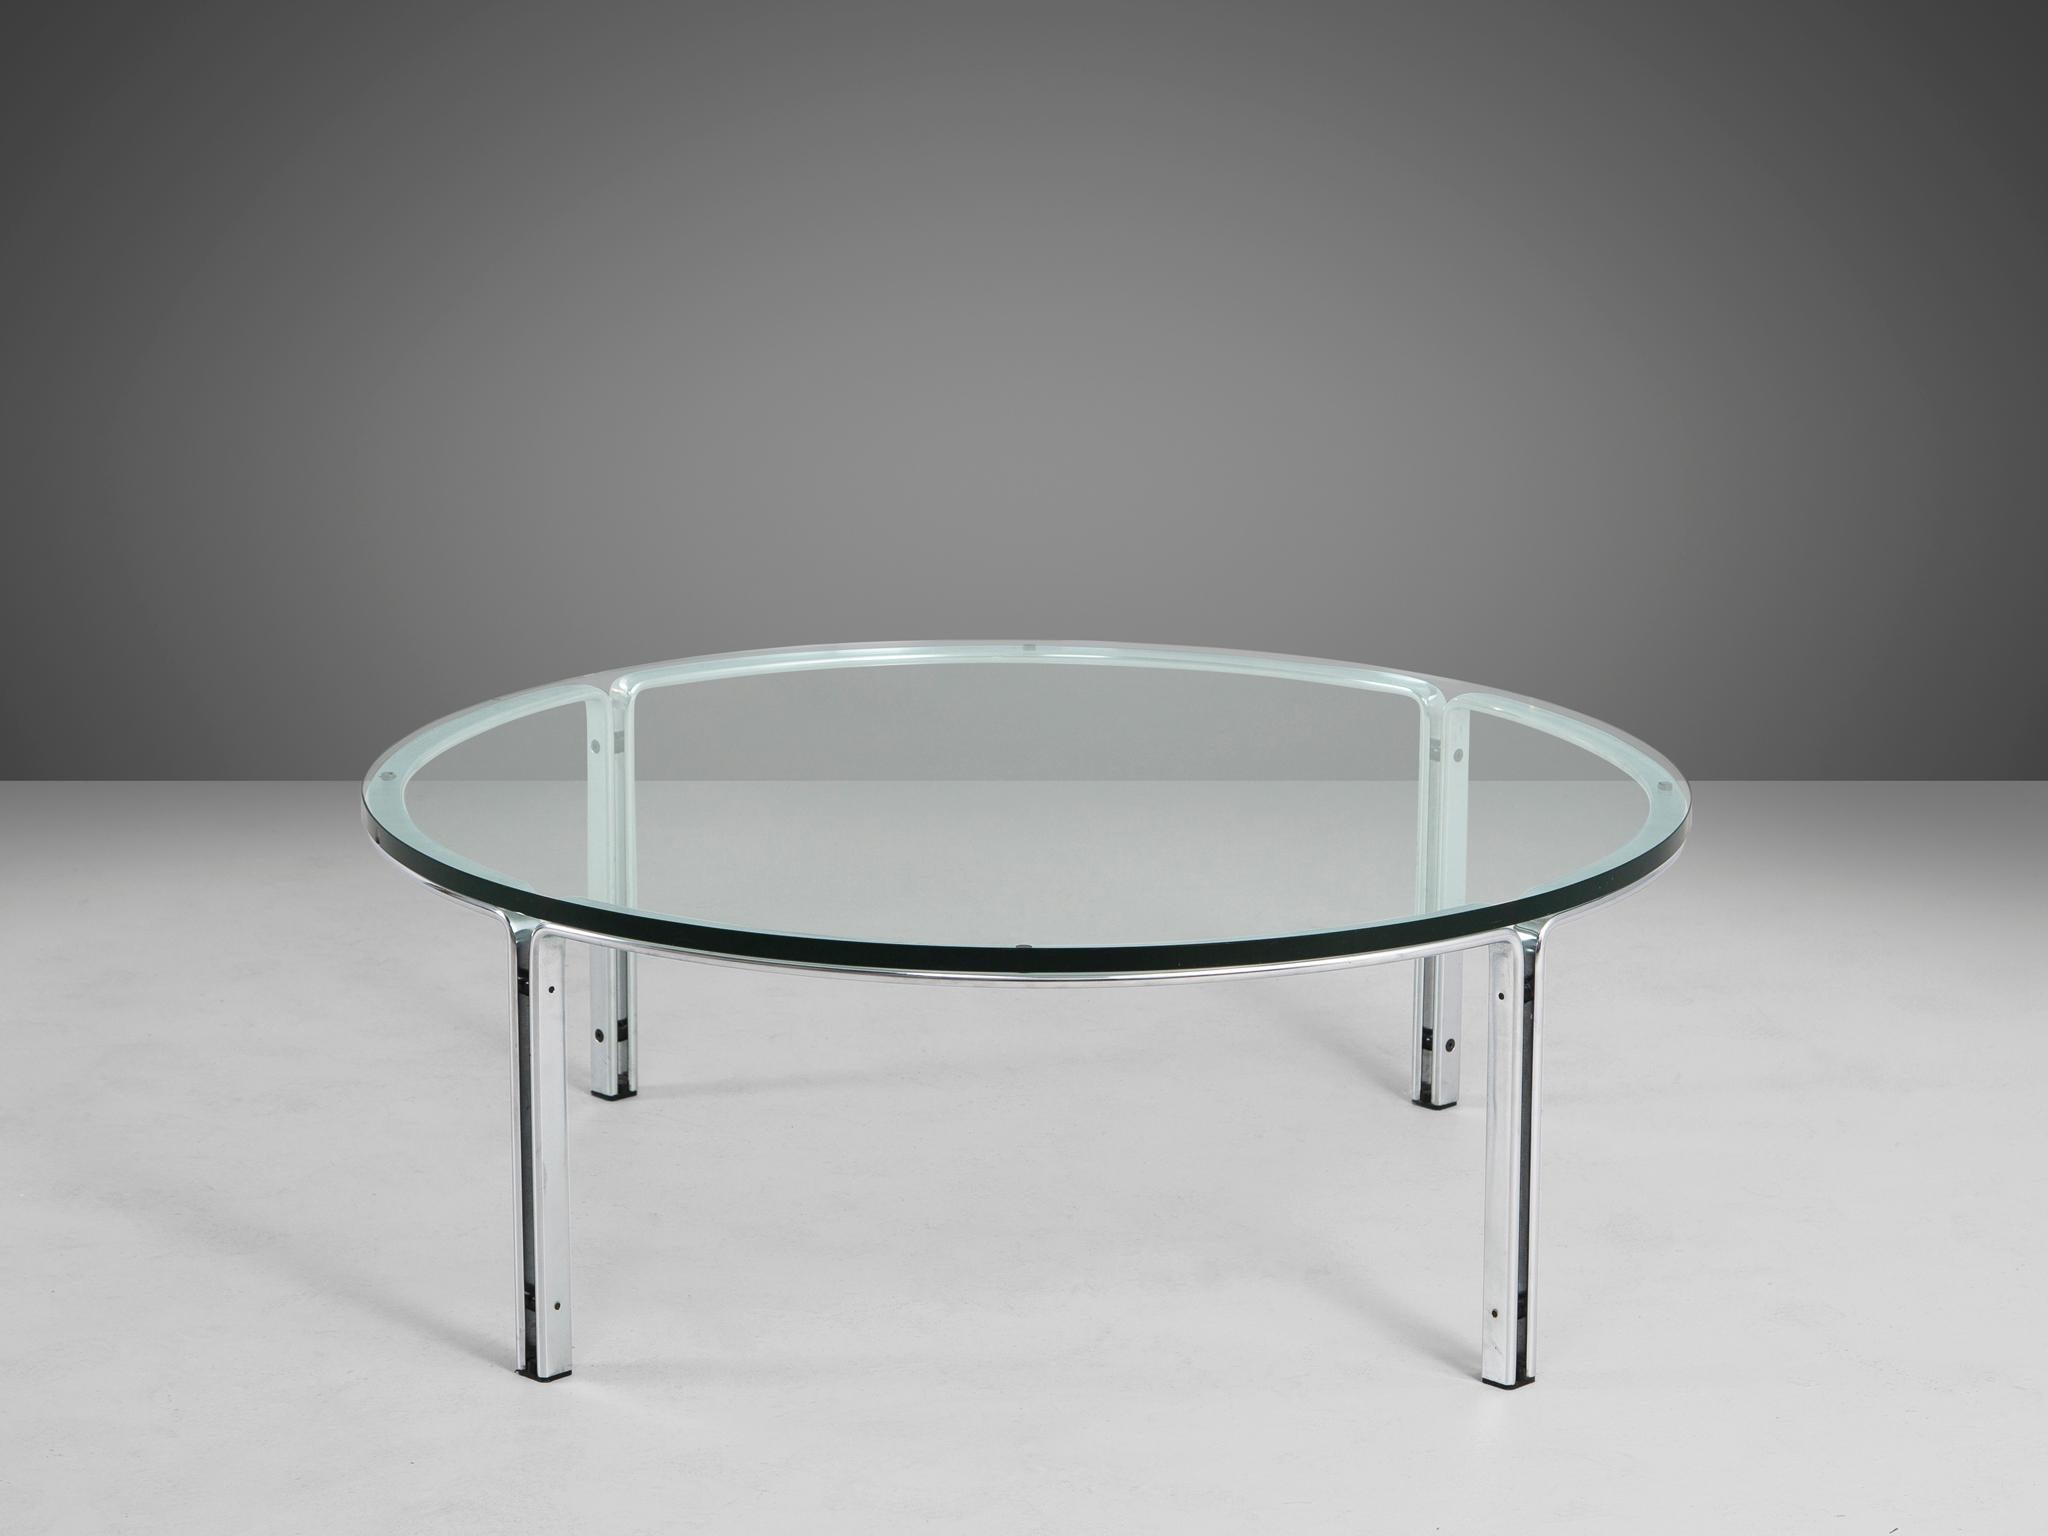 Horst Brüning for Kill International, coffee table, steel and glass, Germany, 1970s

Round cocktail table in chrome plates steel and glass. The design by Brüning is simplistic, yet due the combination of materials, this table gets it